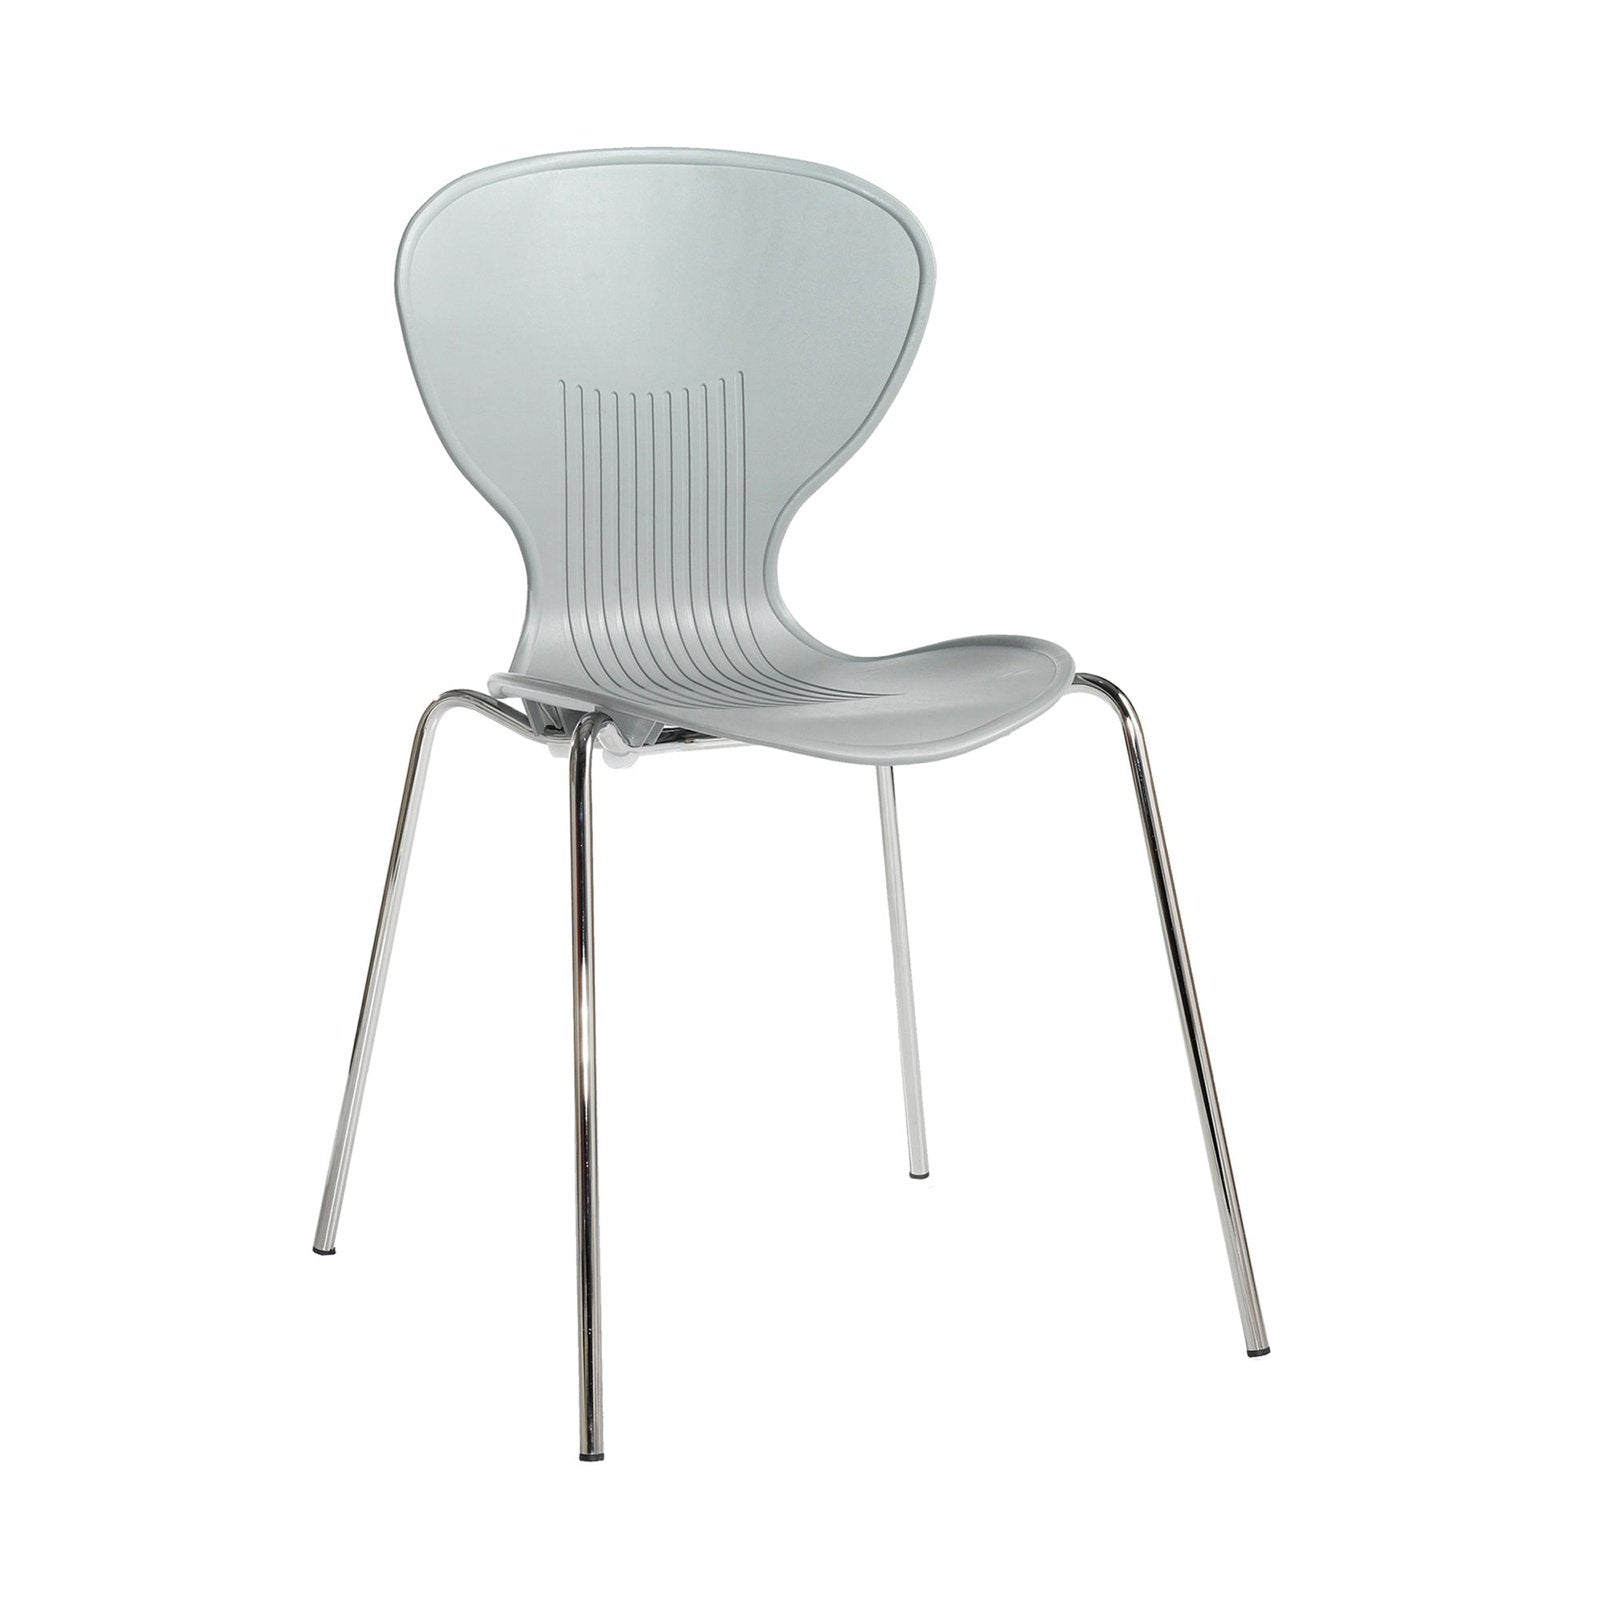 Sienna one piece shell chair with chrome legs - Office Products Online